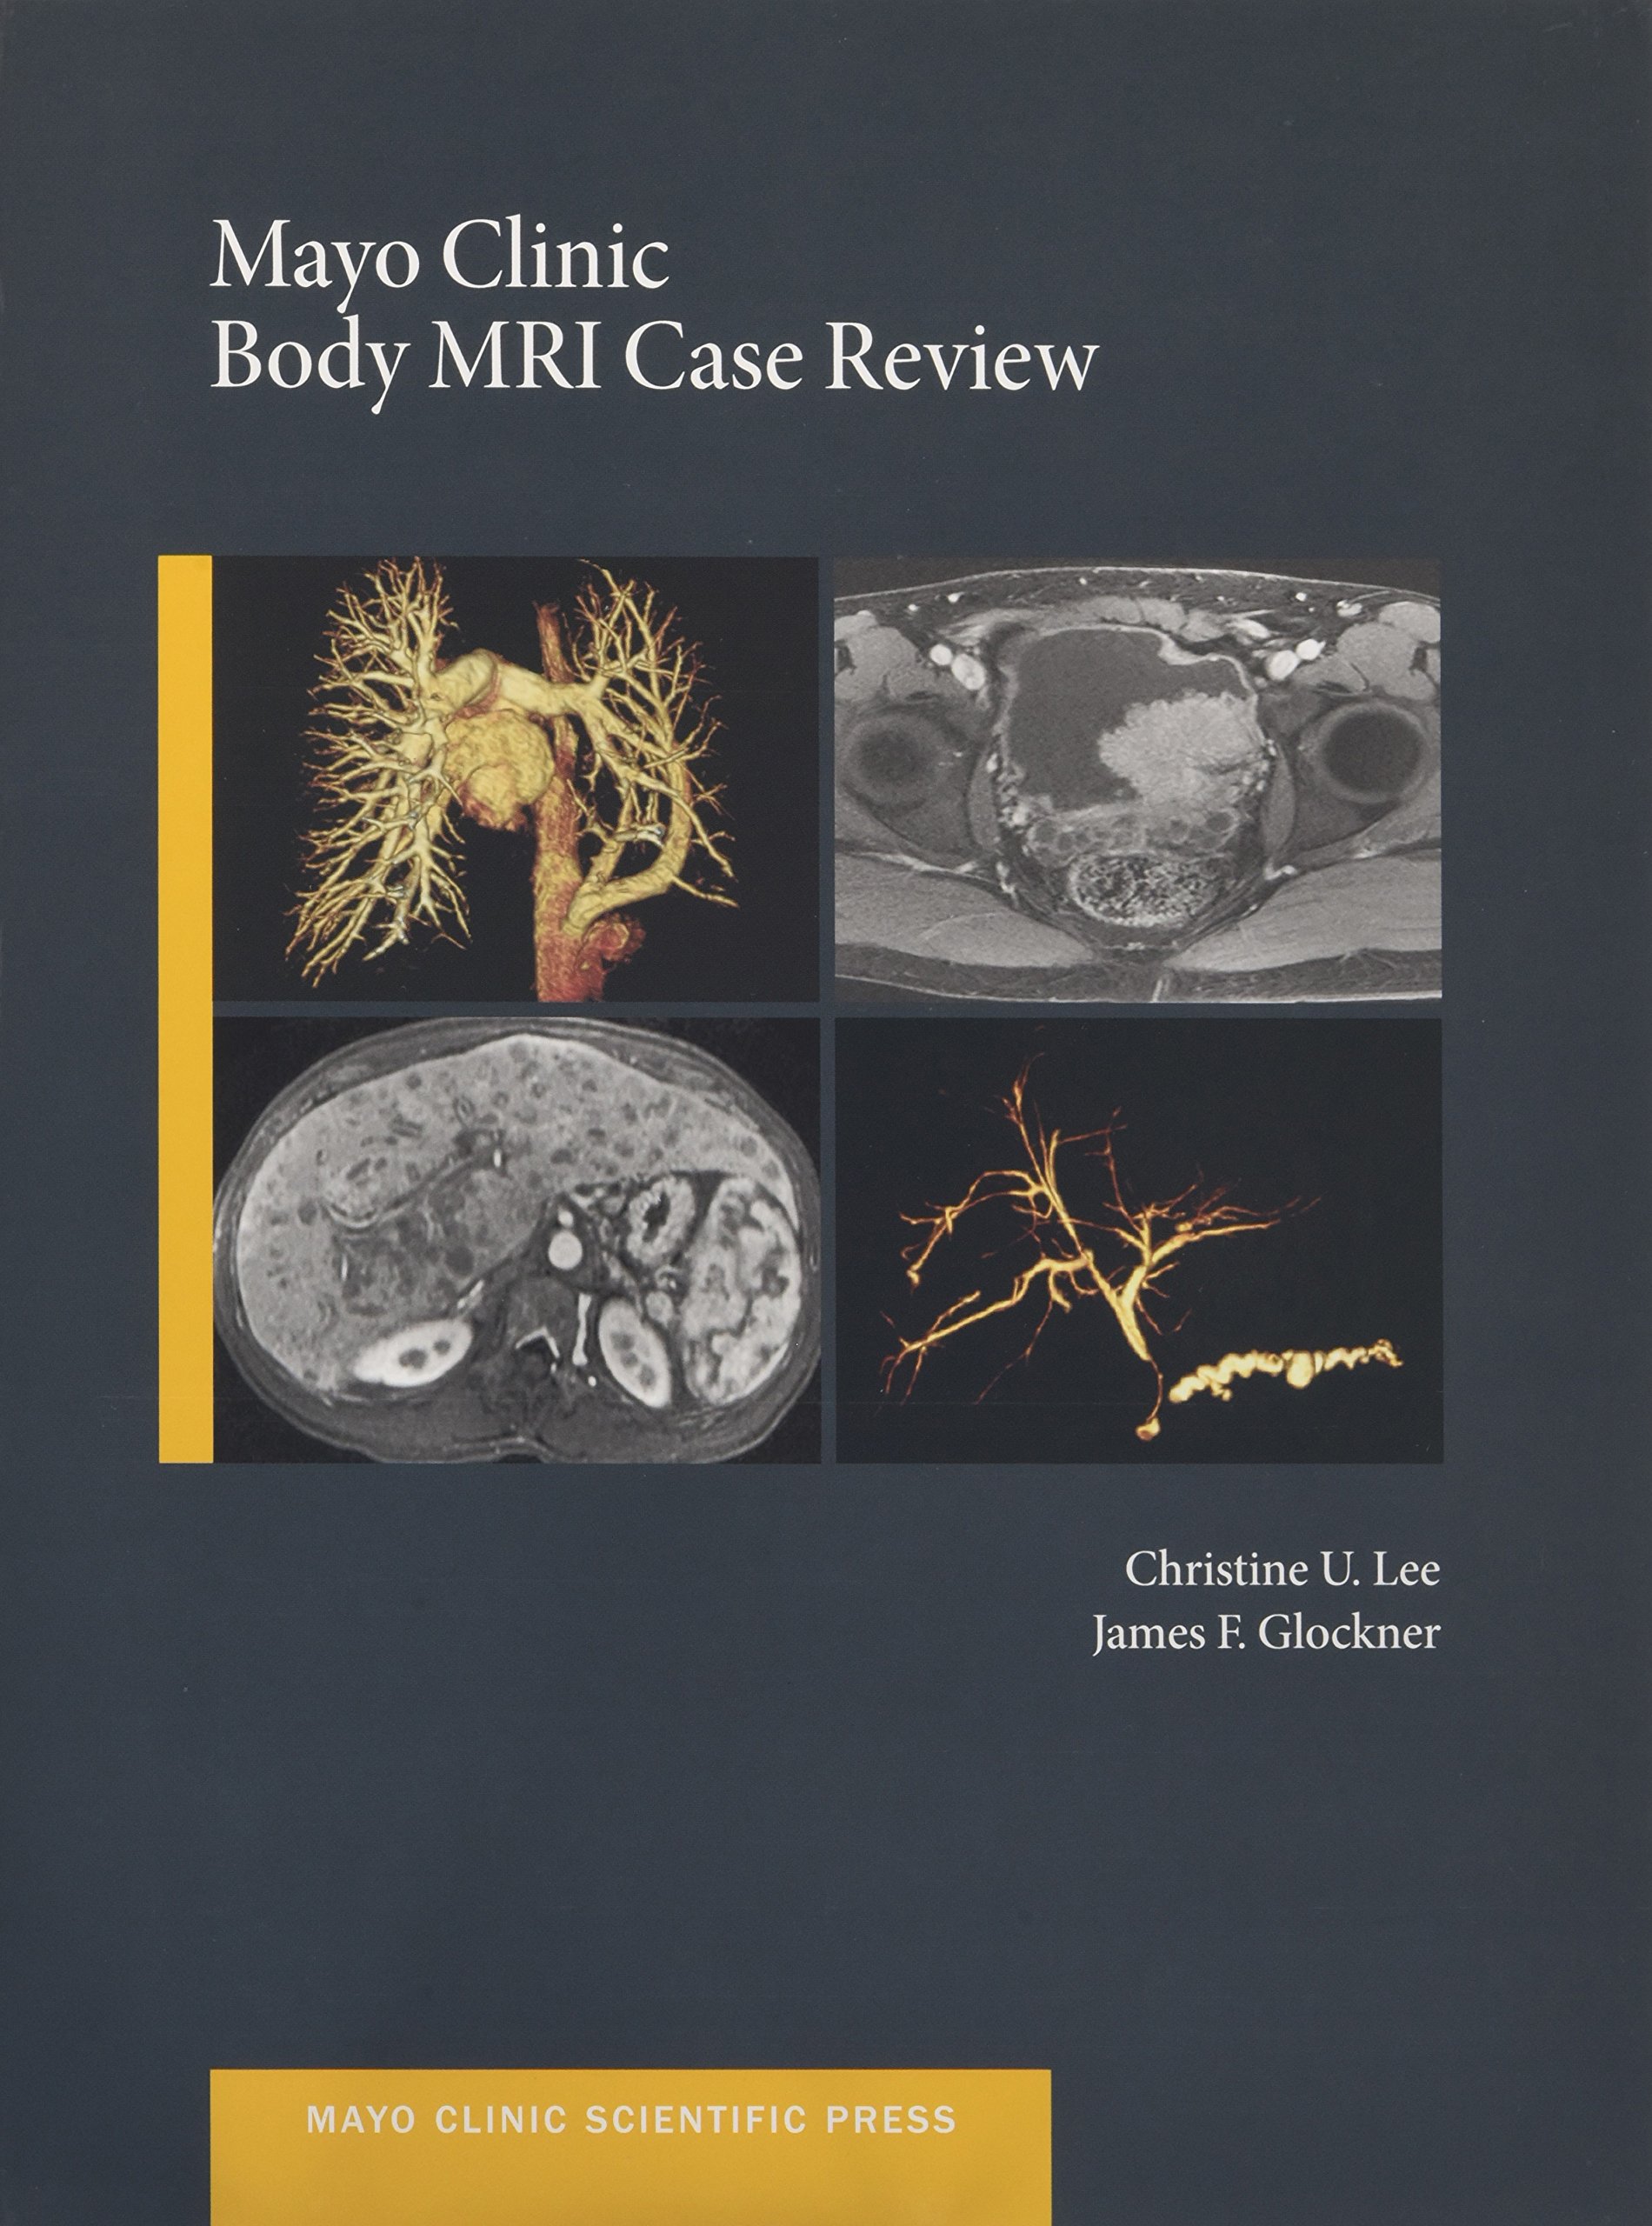 Mayo Clinic Body Mri Case Review- AIBH Exclusive